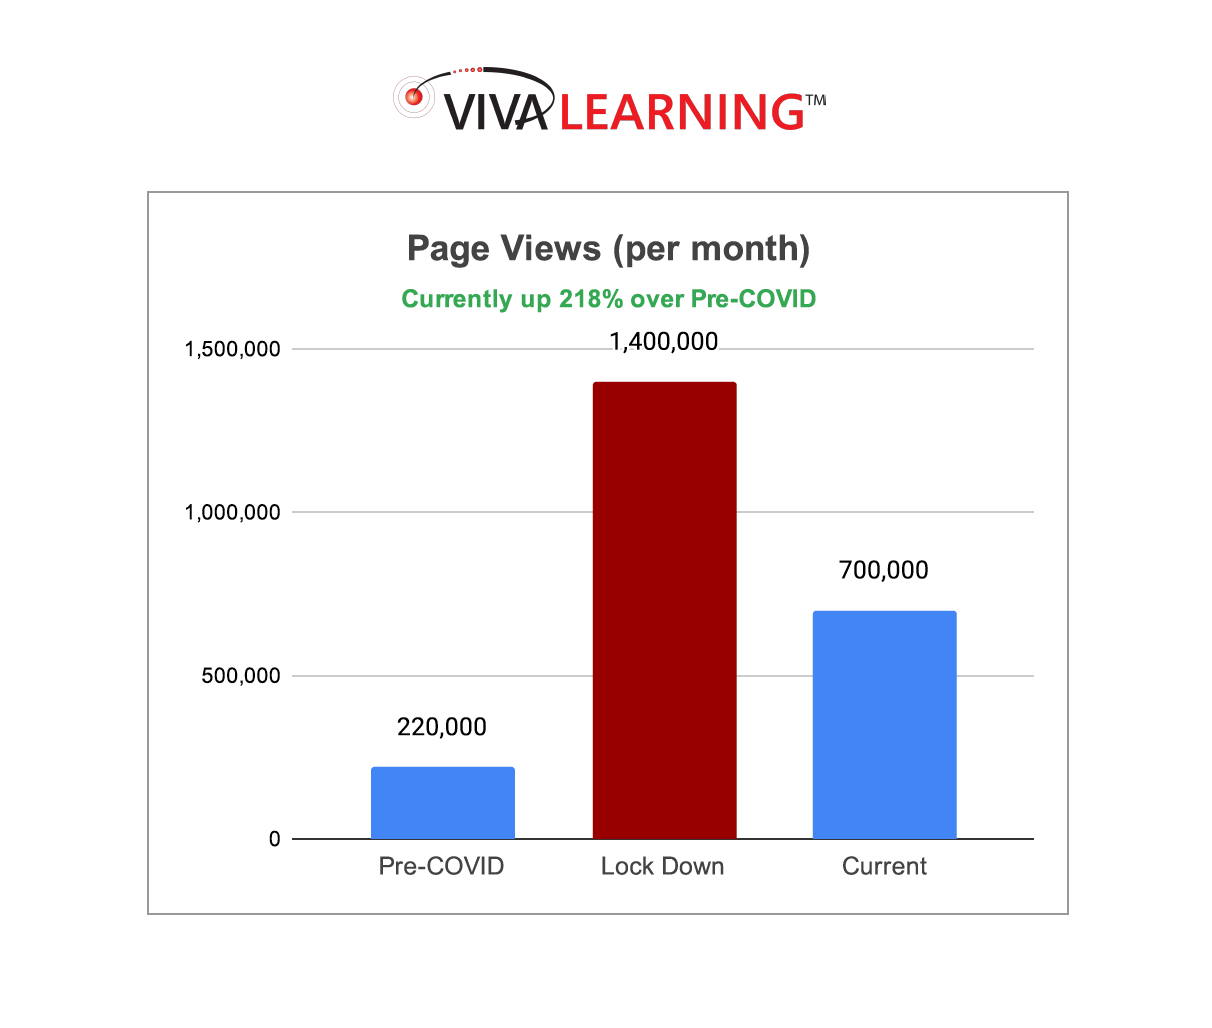 The number of page views reflects a 218% increase compared to pre-COVID figures.